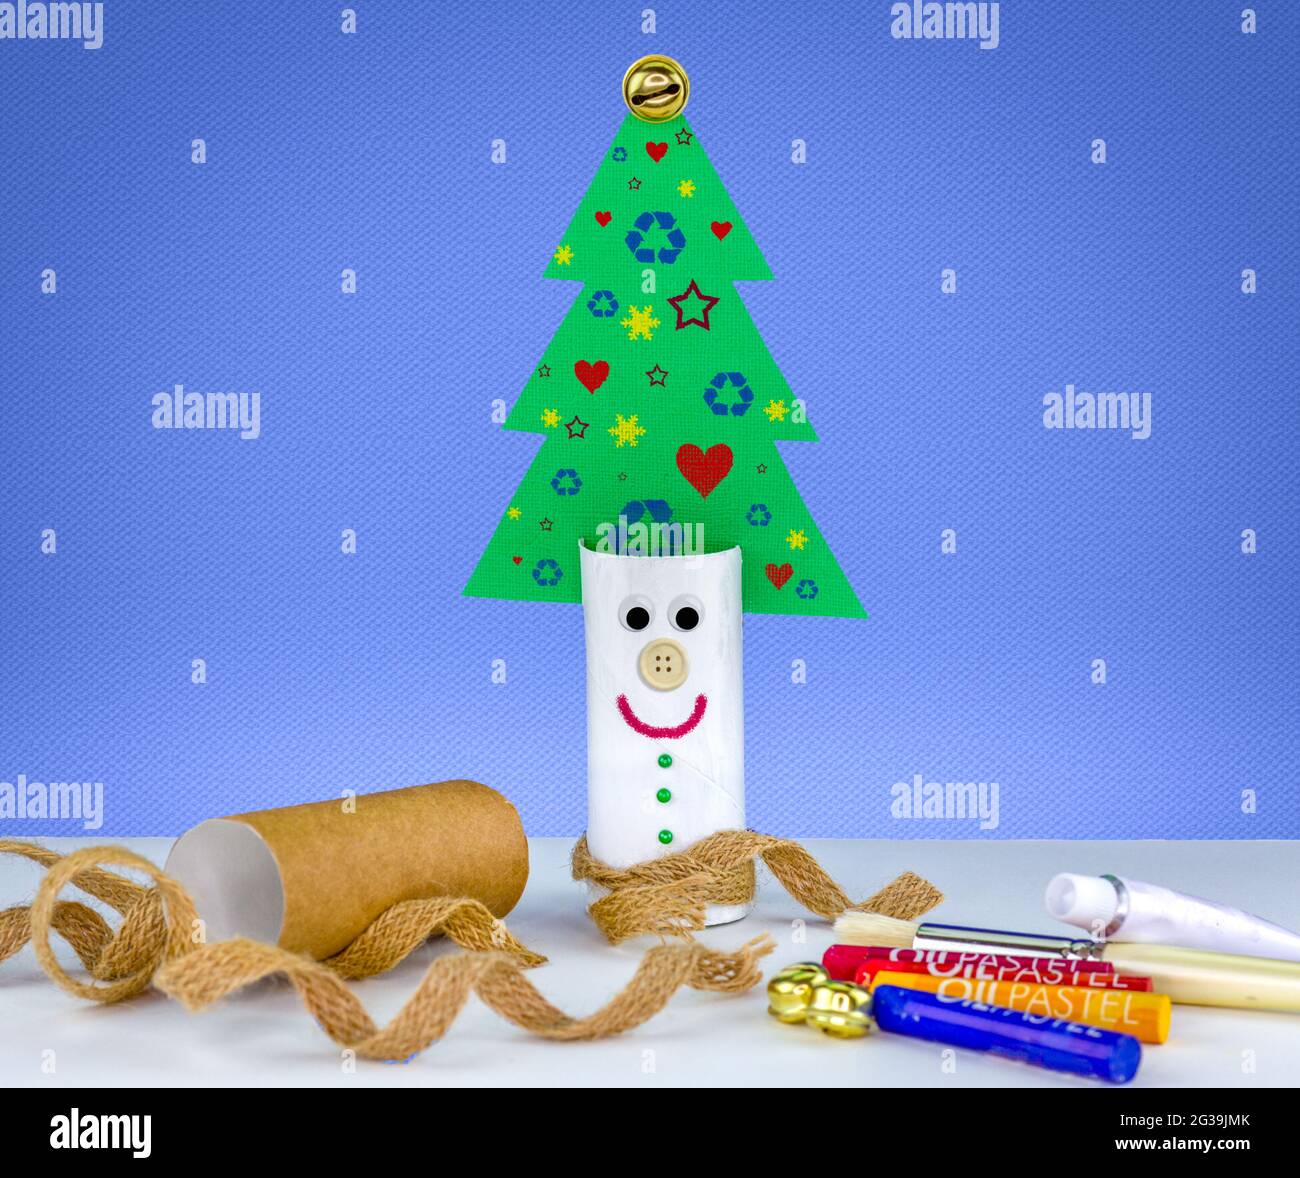 Recycle toilet roll tube, decorated and reused to make fun Christmas tree decoration with smiling face, homemade quirky craft fun. Stock Photo